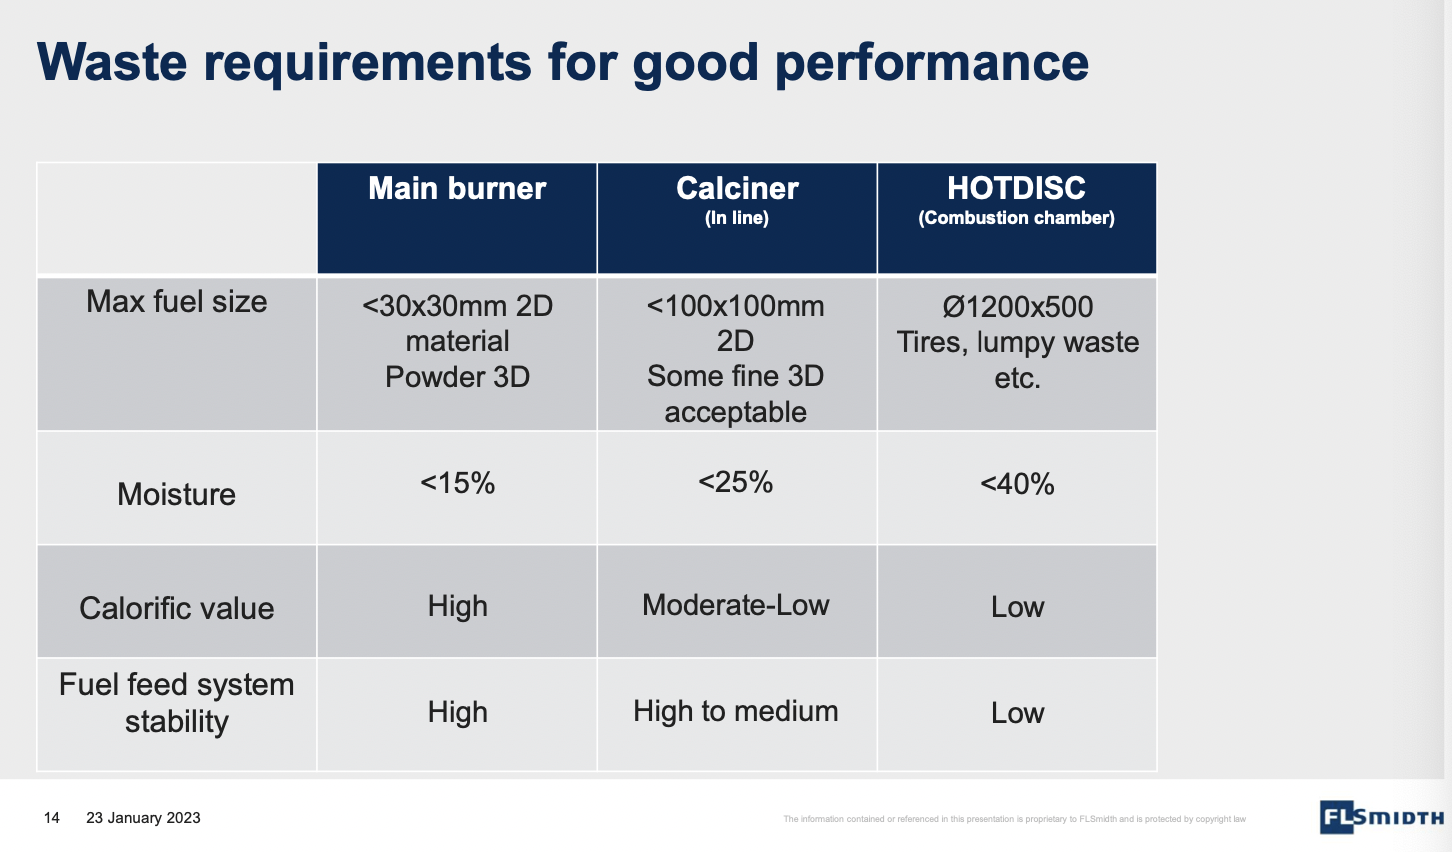 Waste requirements for good performance